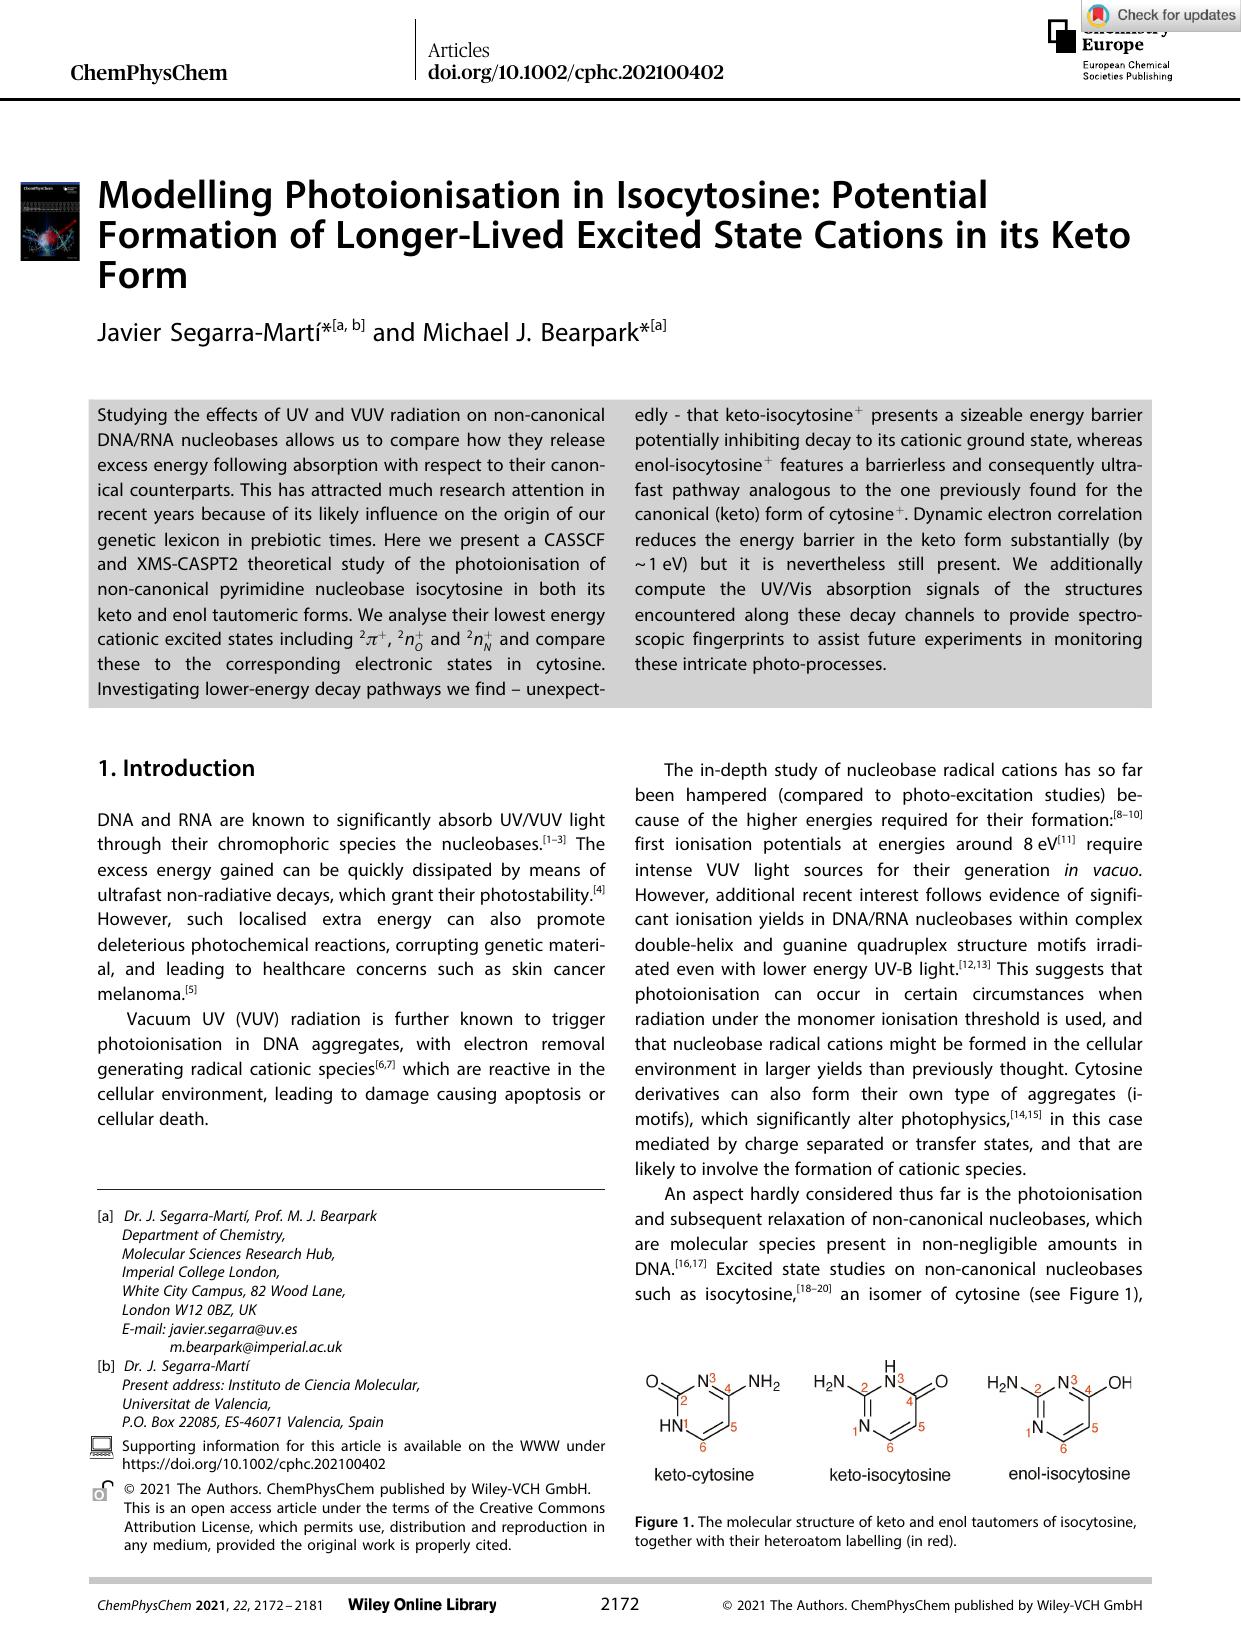 Modelling Photoionisation in Isocytosine: Potential Formation of LongerâLived Excited State Cations in its Keto Form by Unknown